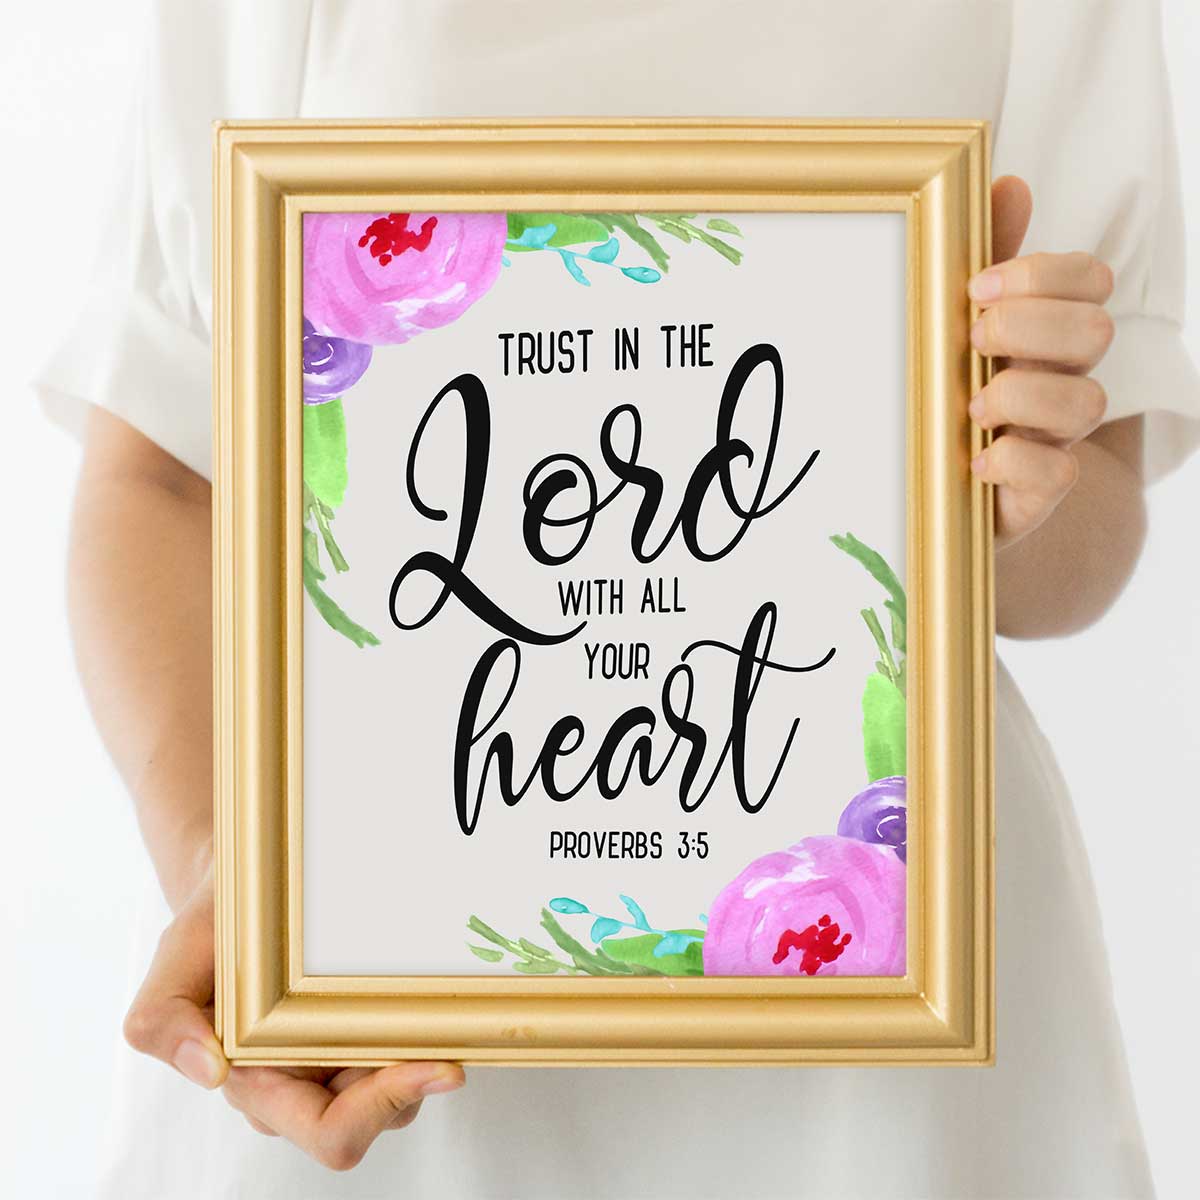 Trust In The Lord Proverbs 3:5 Scripture Art Print